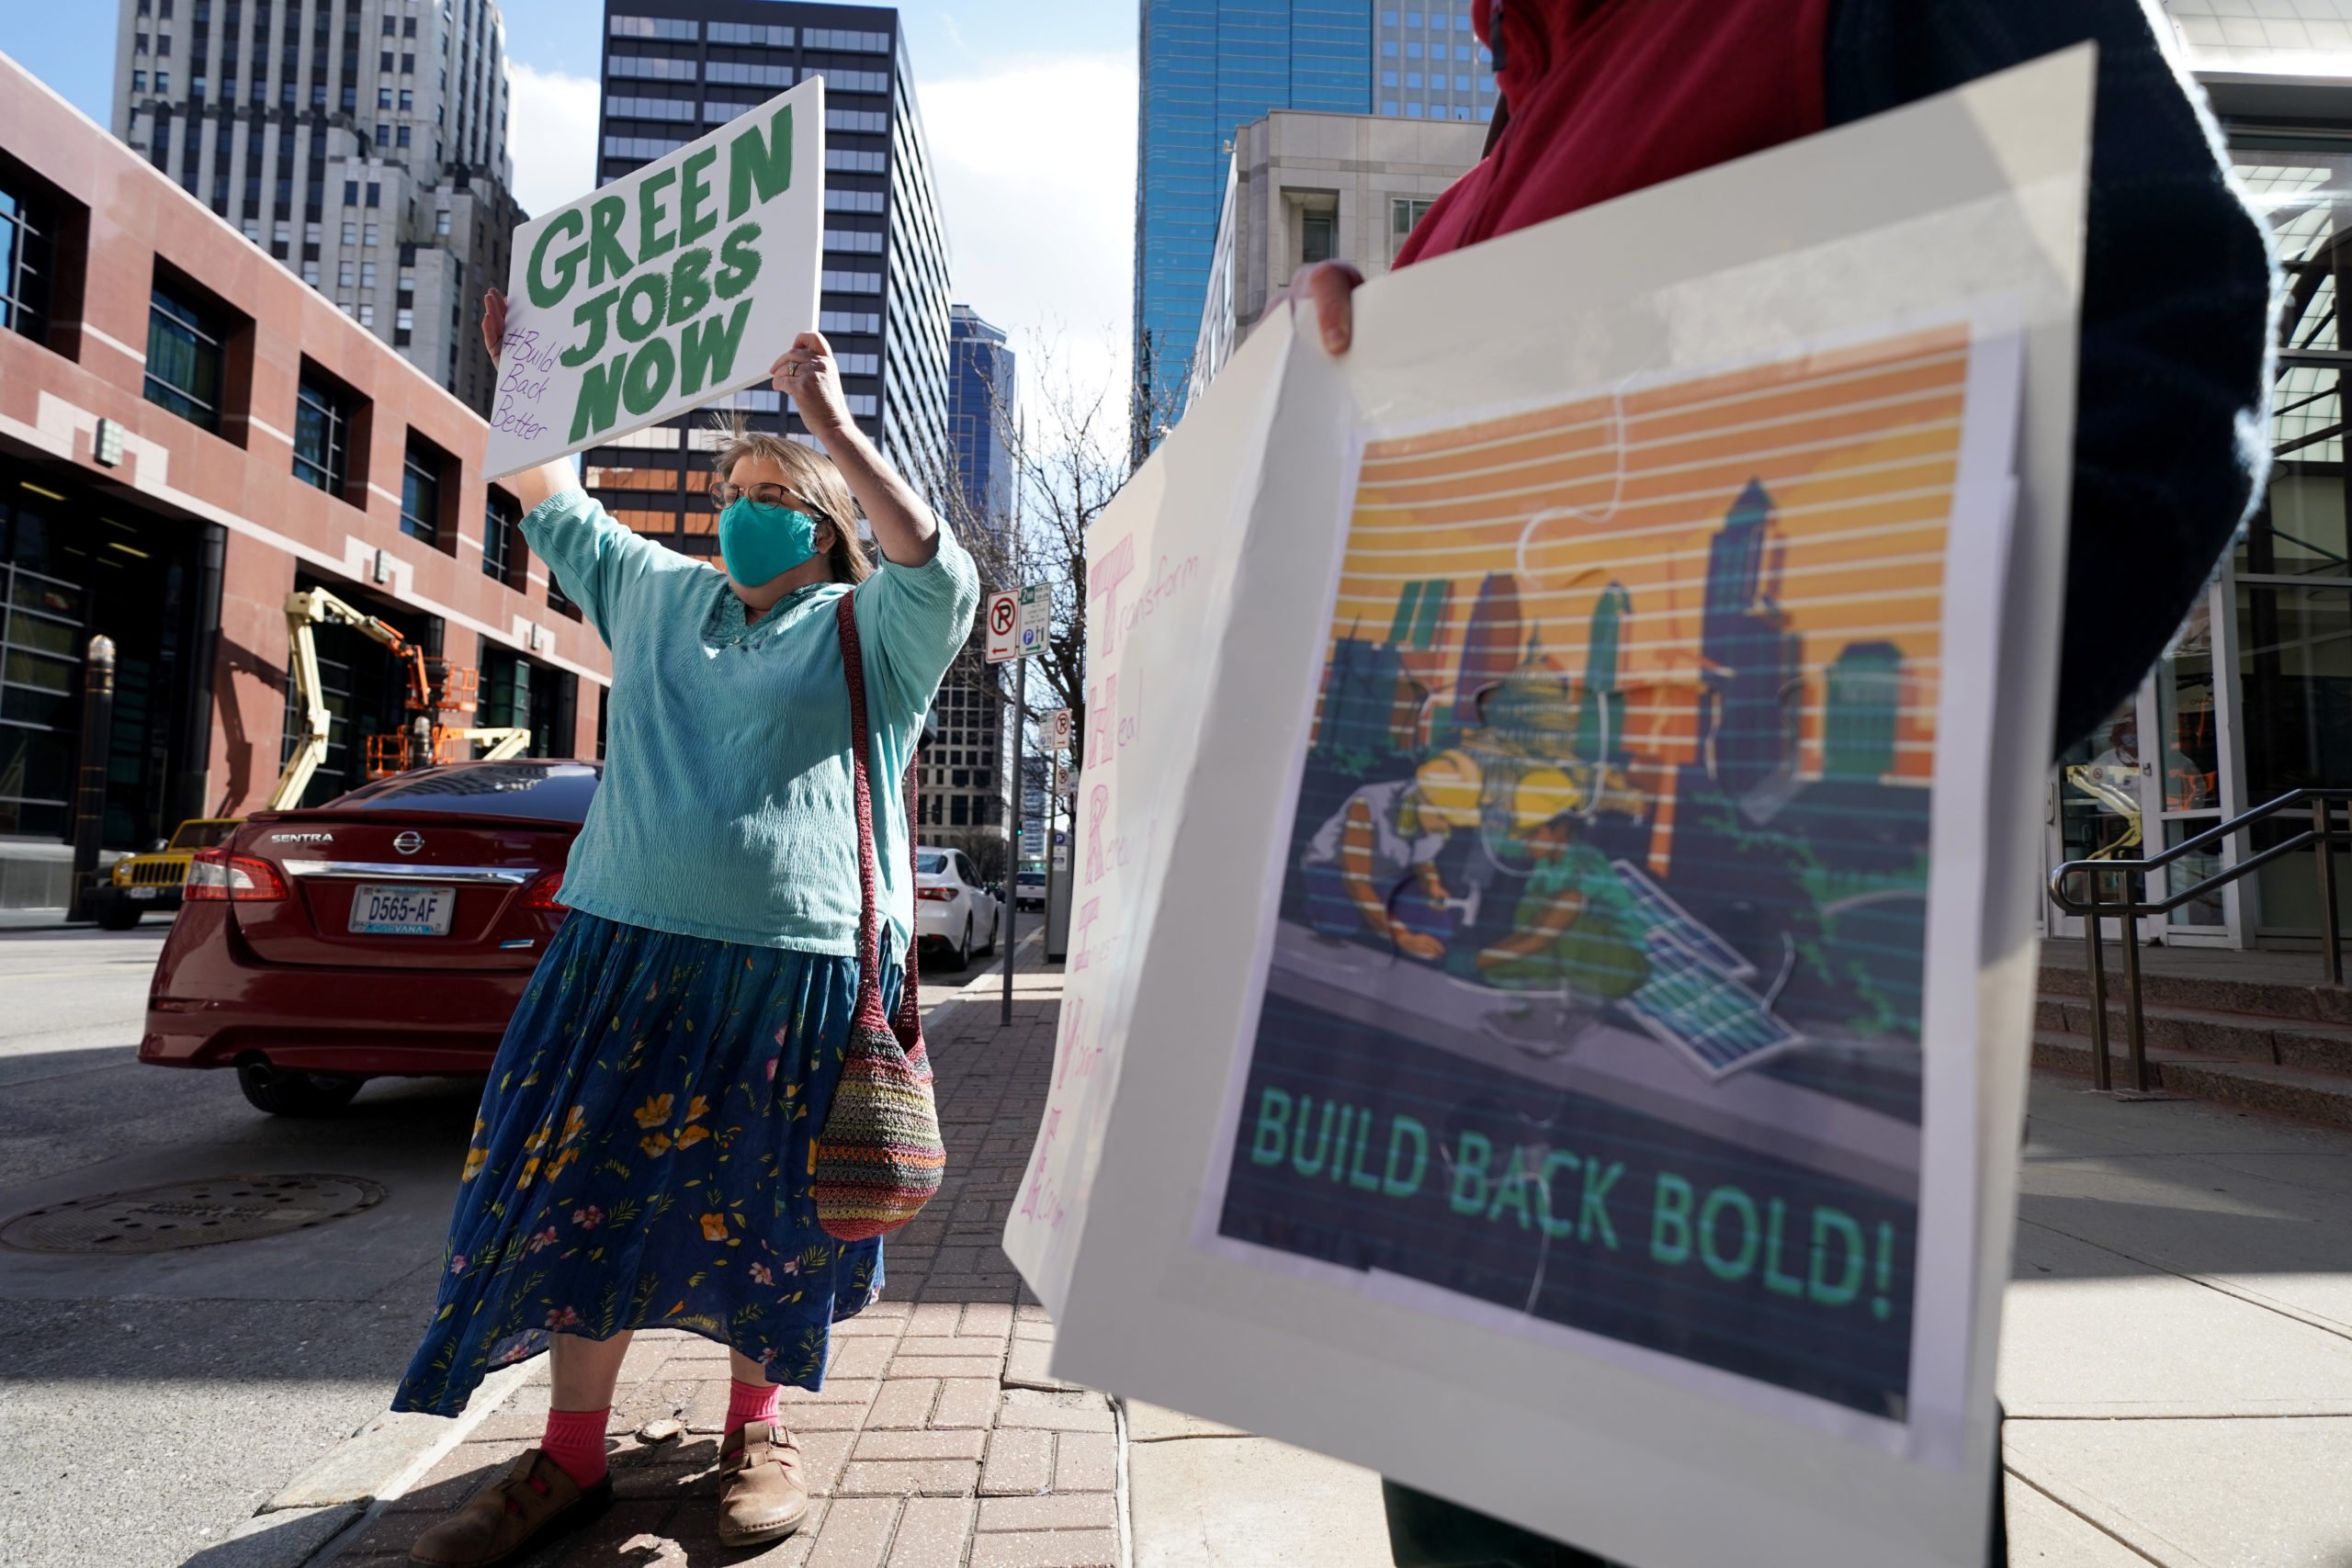 Supporters of President Joe Biden hold signs in favor of his $2.3 trillion infrastructure plan on Wednesday. (Ed Zurga/Getty Images for Green New Deal Network)